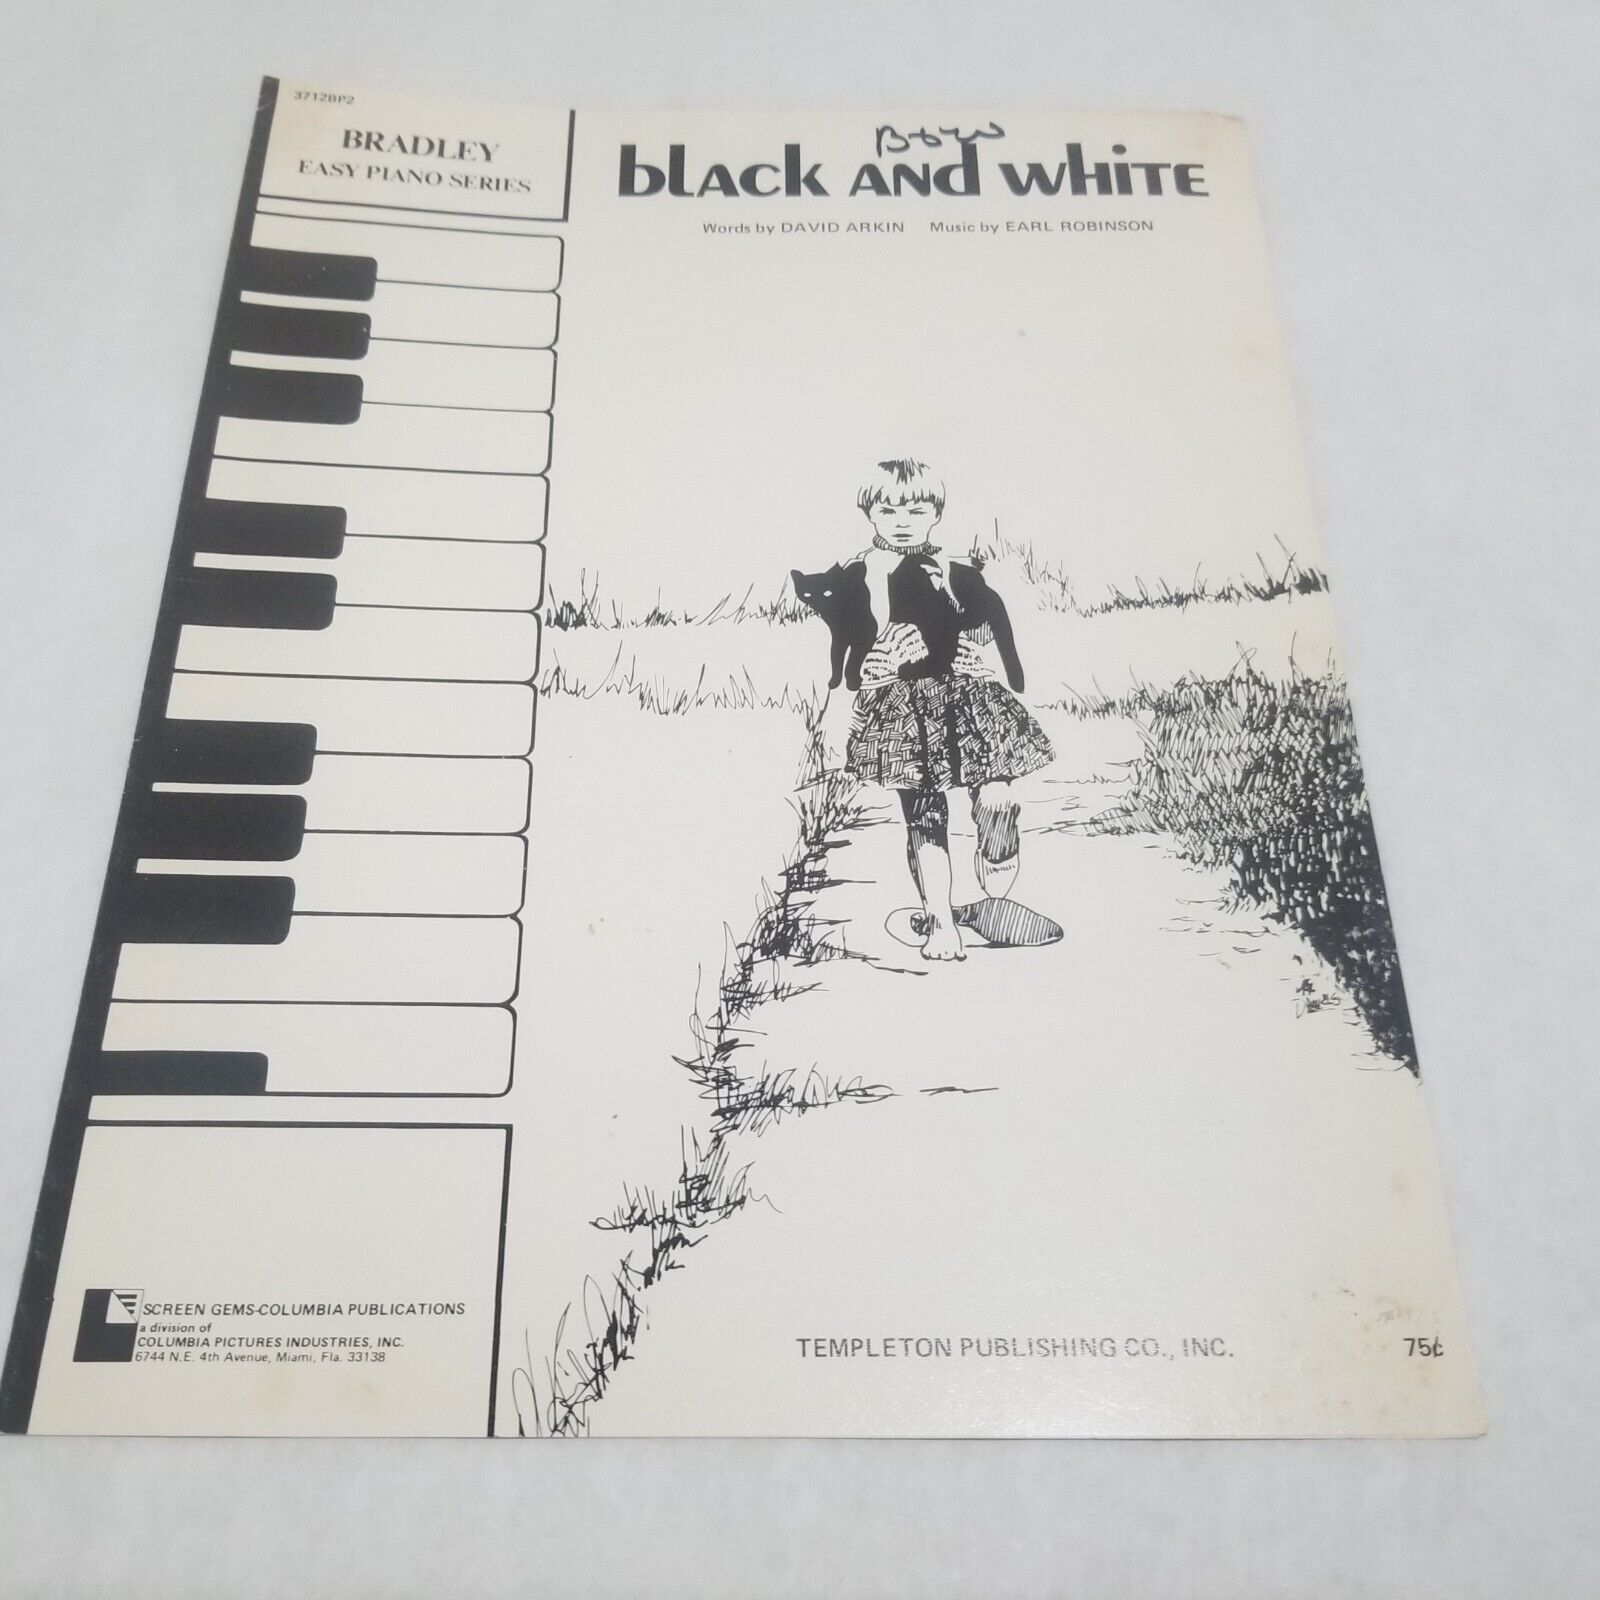 Primary image for Black and White by David Arkin and Earl Robinson Bradley Easy Piano Series 1972